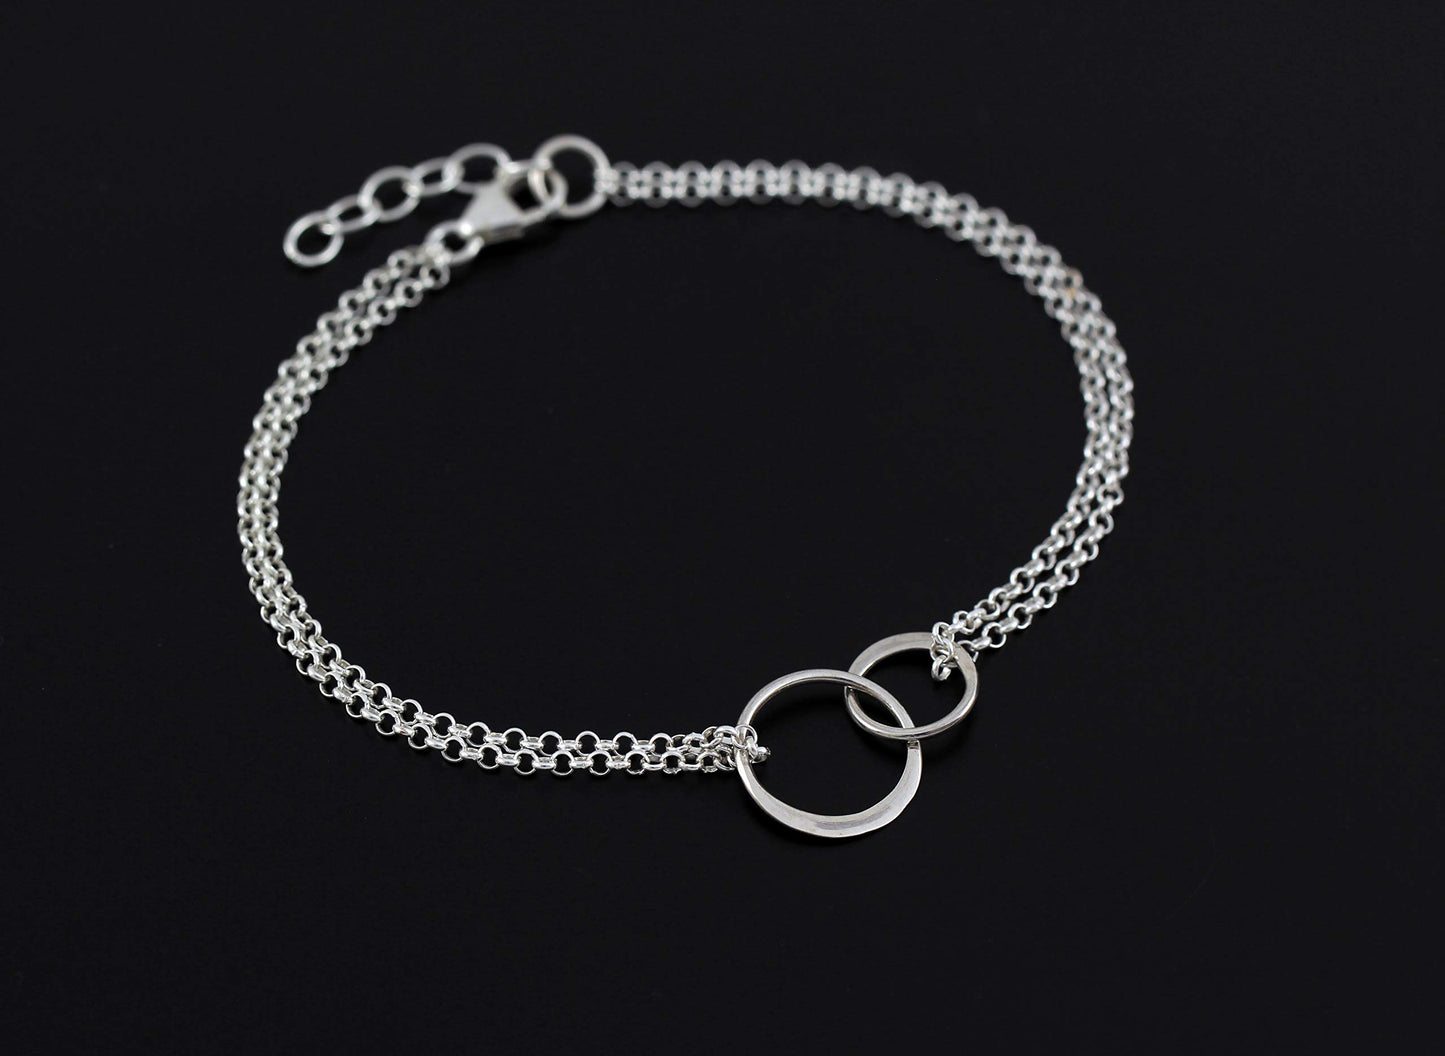 A Charmed Impression Father to Daughter Gifts • Sterling Silver Bracelet • Infinite Love • Two Connected Eternity Circles Bracelet • Gift for Women Teenage Girl • Gift for Daughter from Dad